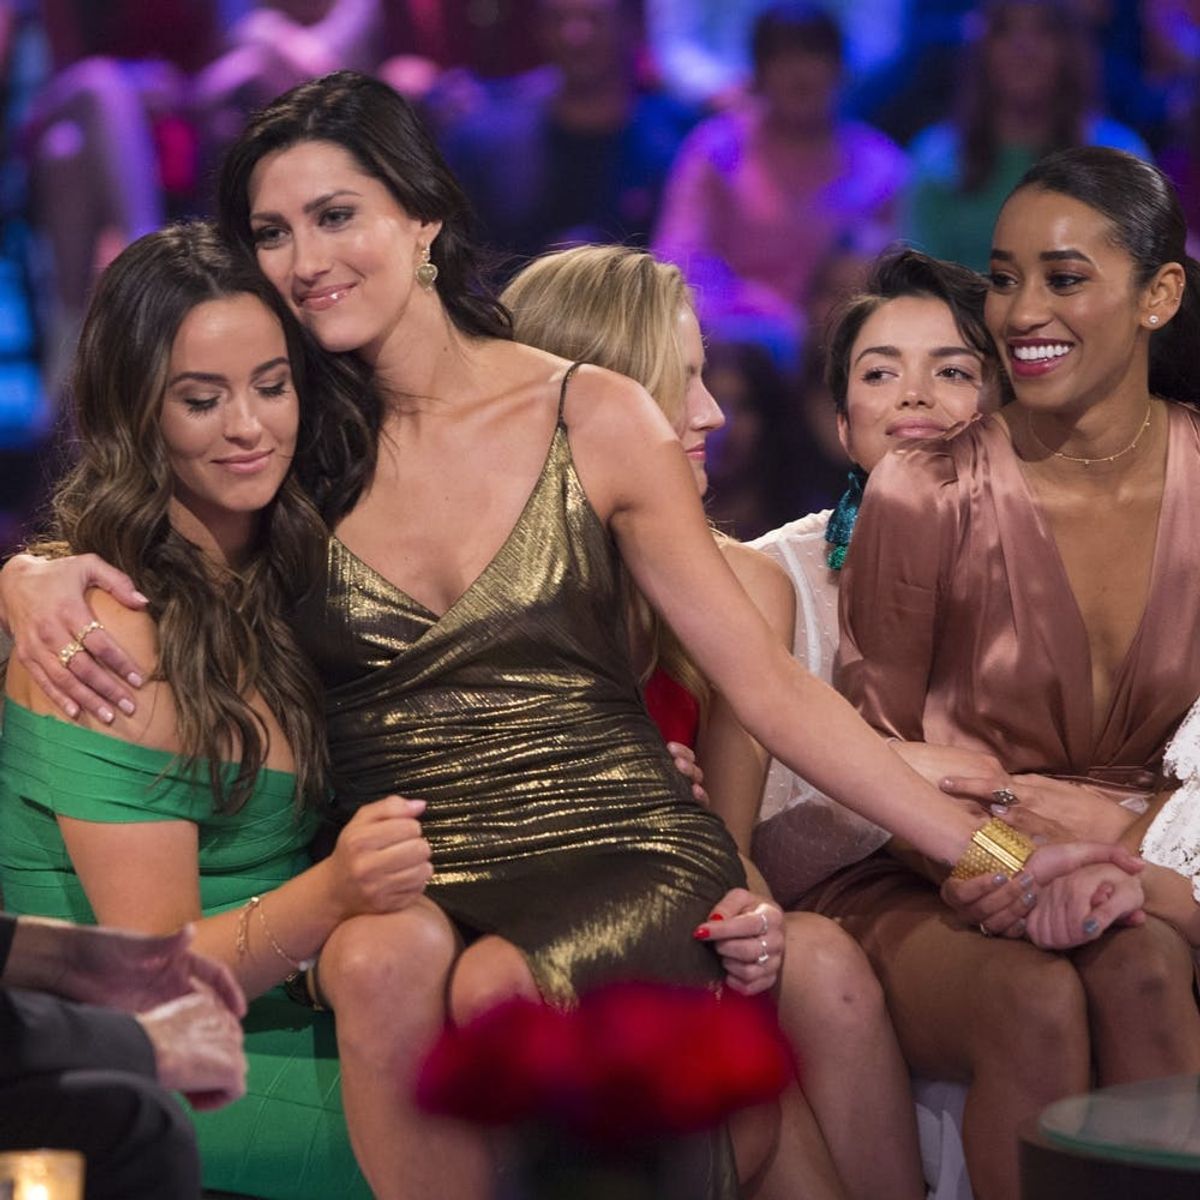 This Meaningful Moment Between the ‘Bachelor’ Women Was the Best Part of the Finale